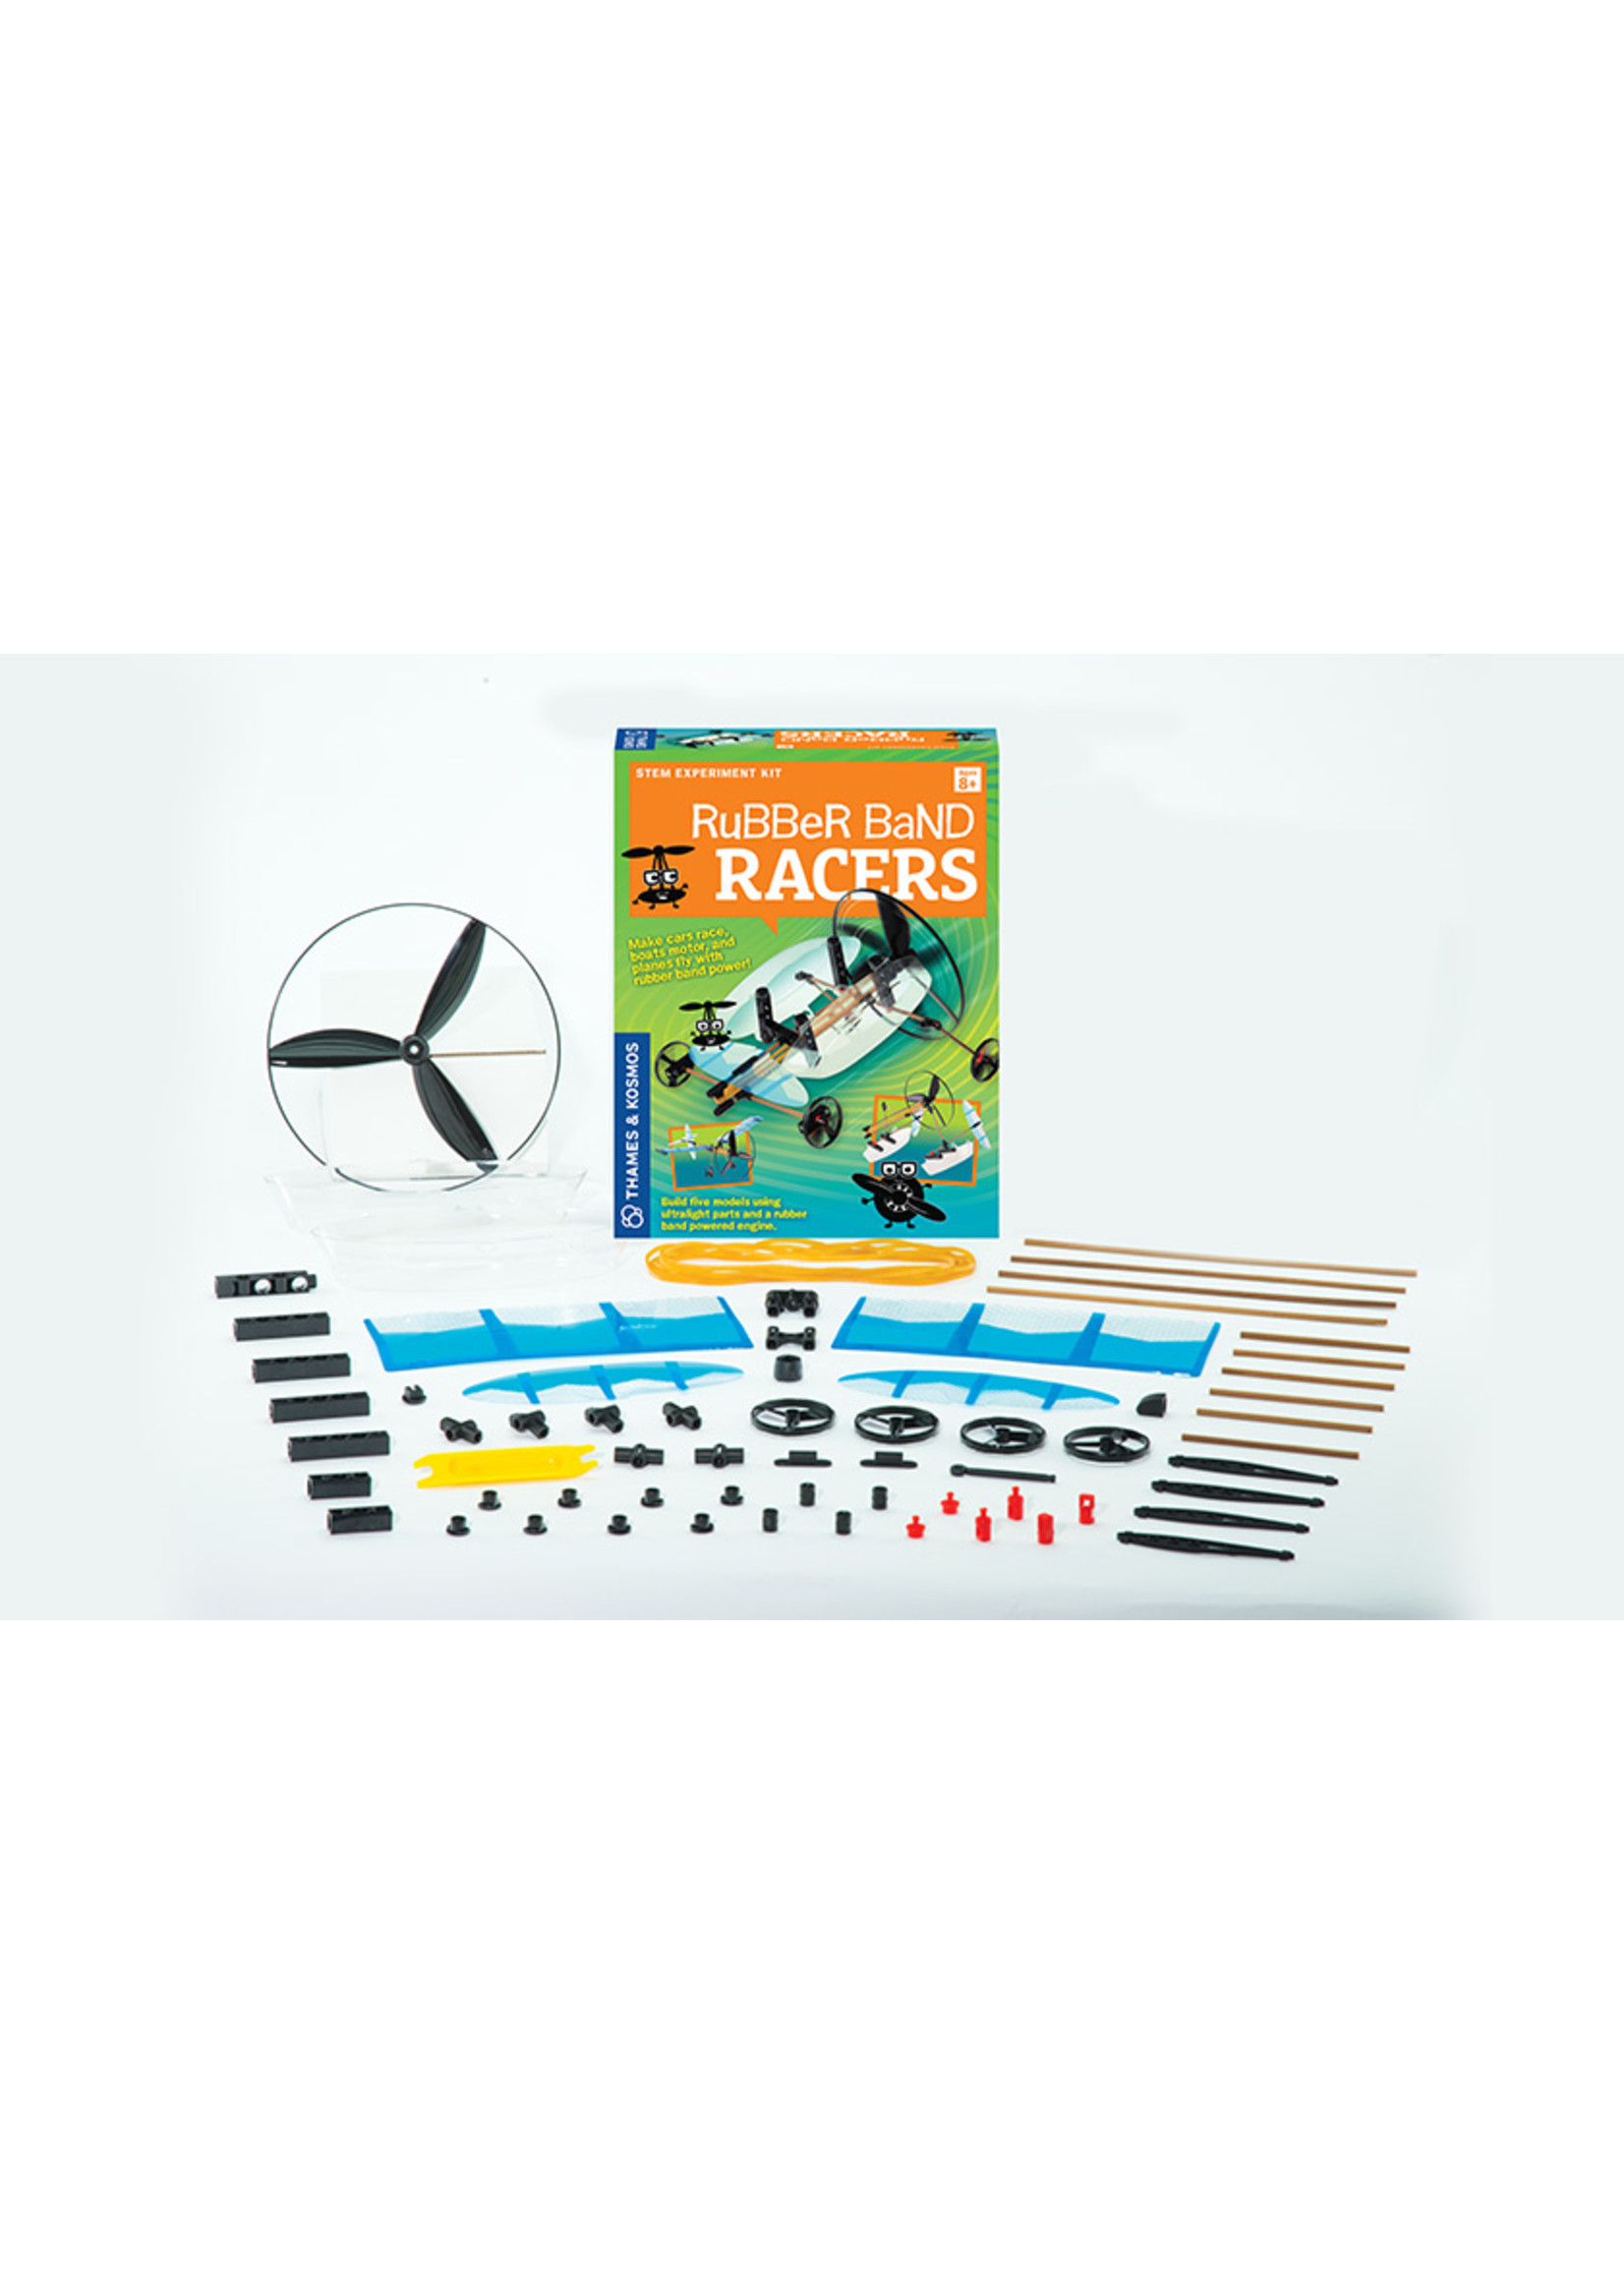 Thames & Kosmos Rubber Band Racers